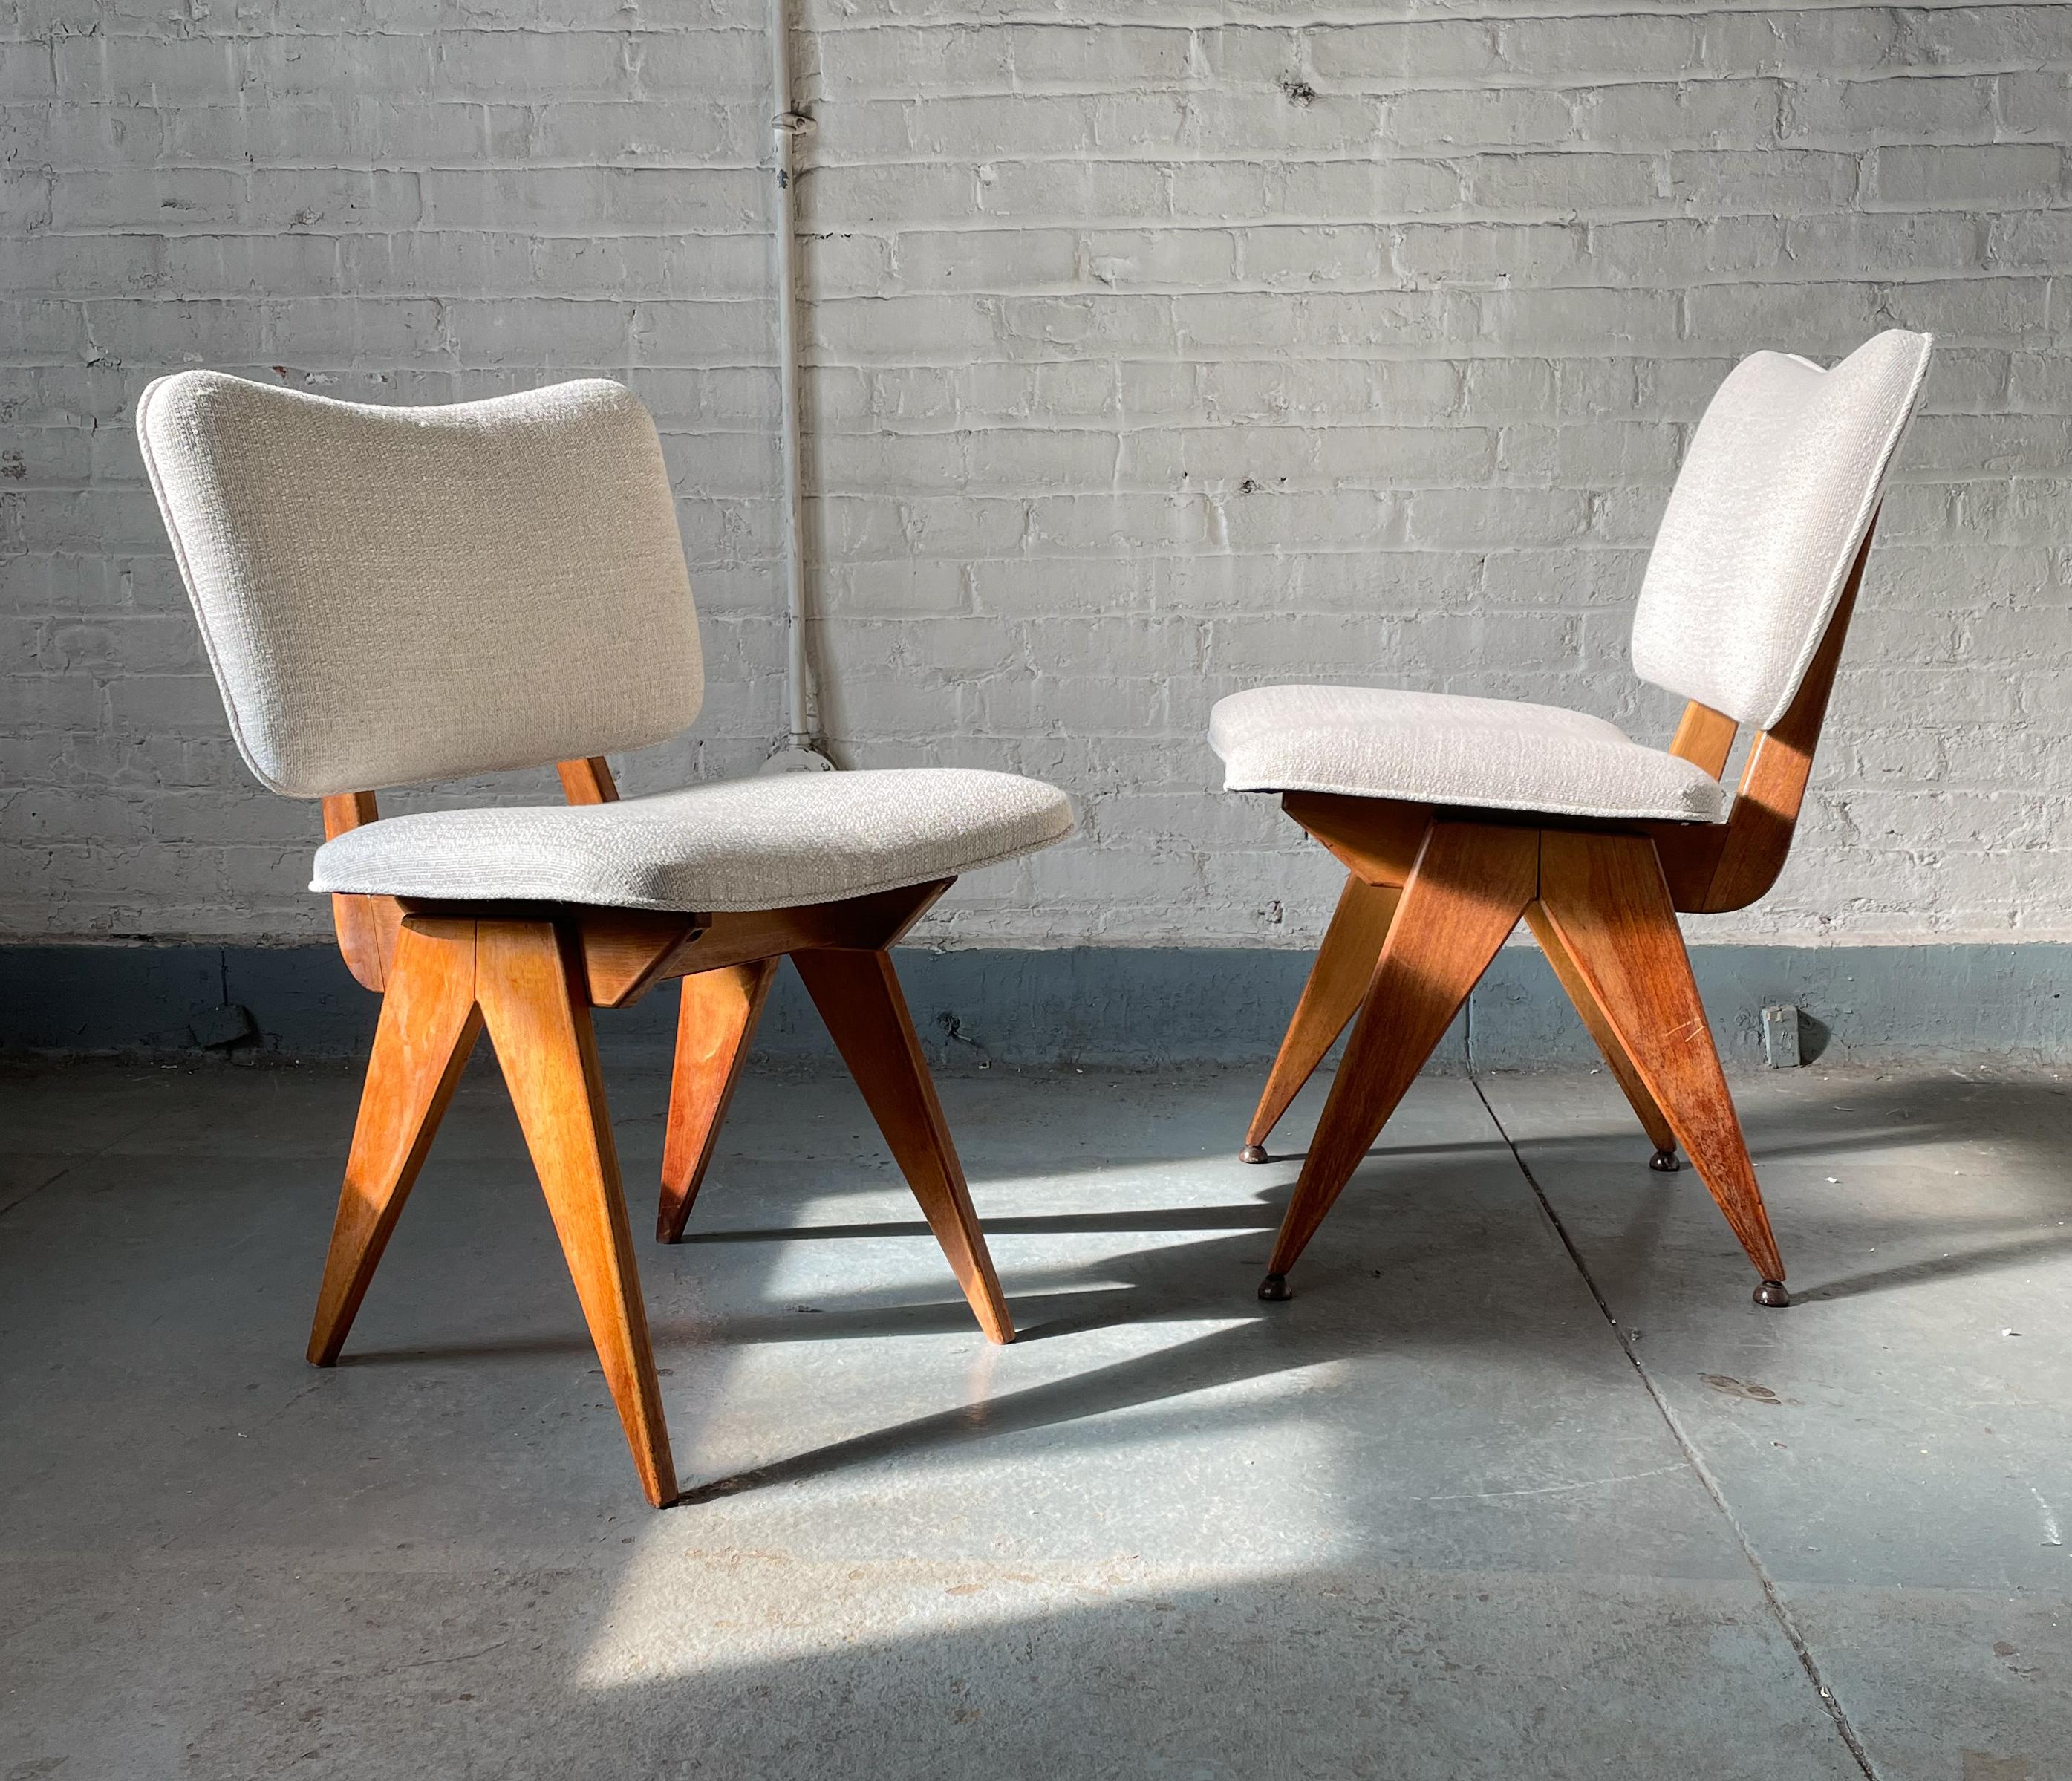 Rare pair of dining or side chairs in birch with compass-shaped legs designed by Jens Risom and produced by his fledgling eponymous company in 1947. Part of an innovative design series previewed in Interiors Magazine in March of 1947 and lauded for